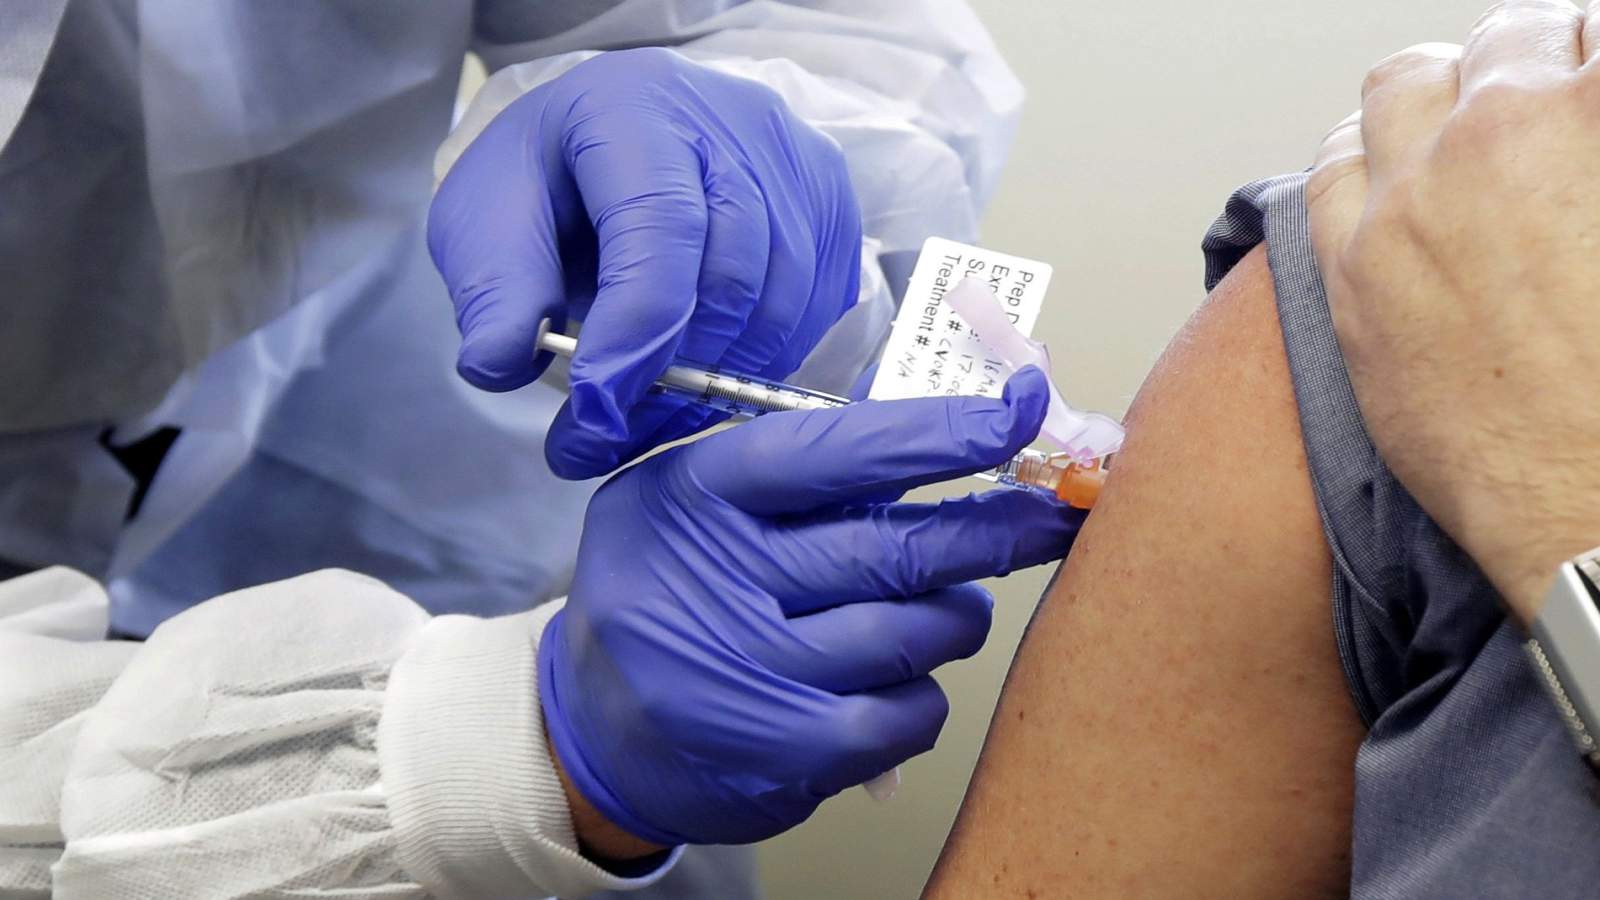 Health experts urge Americans to get flu shot now to help curb Twindemic